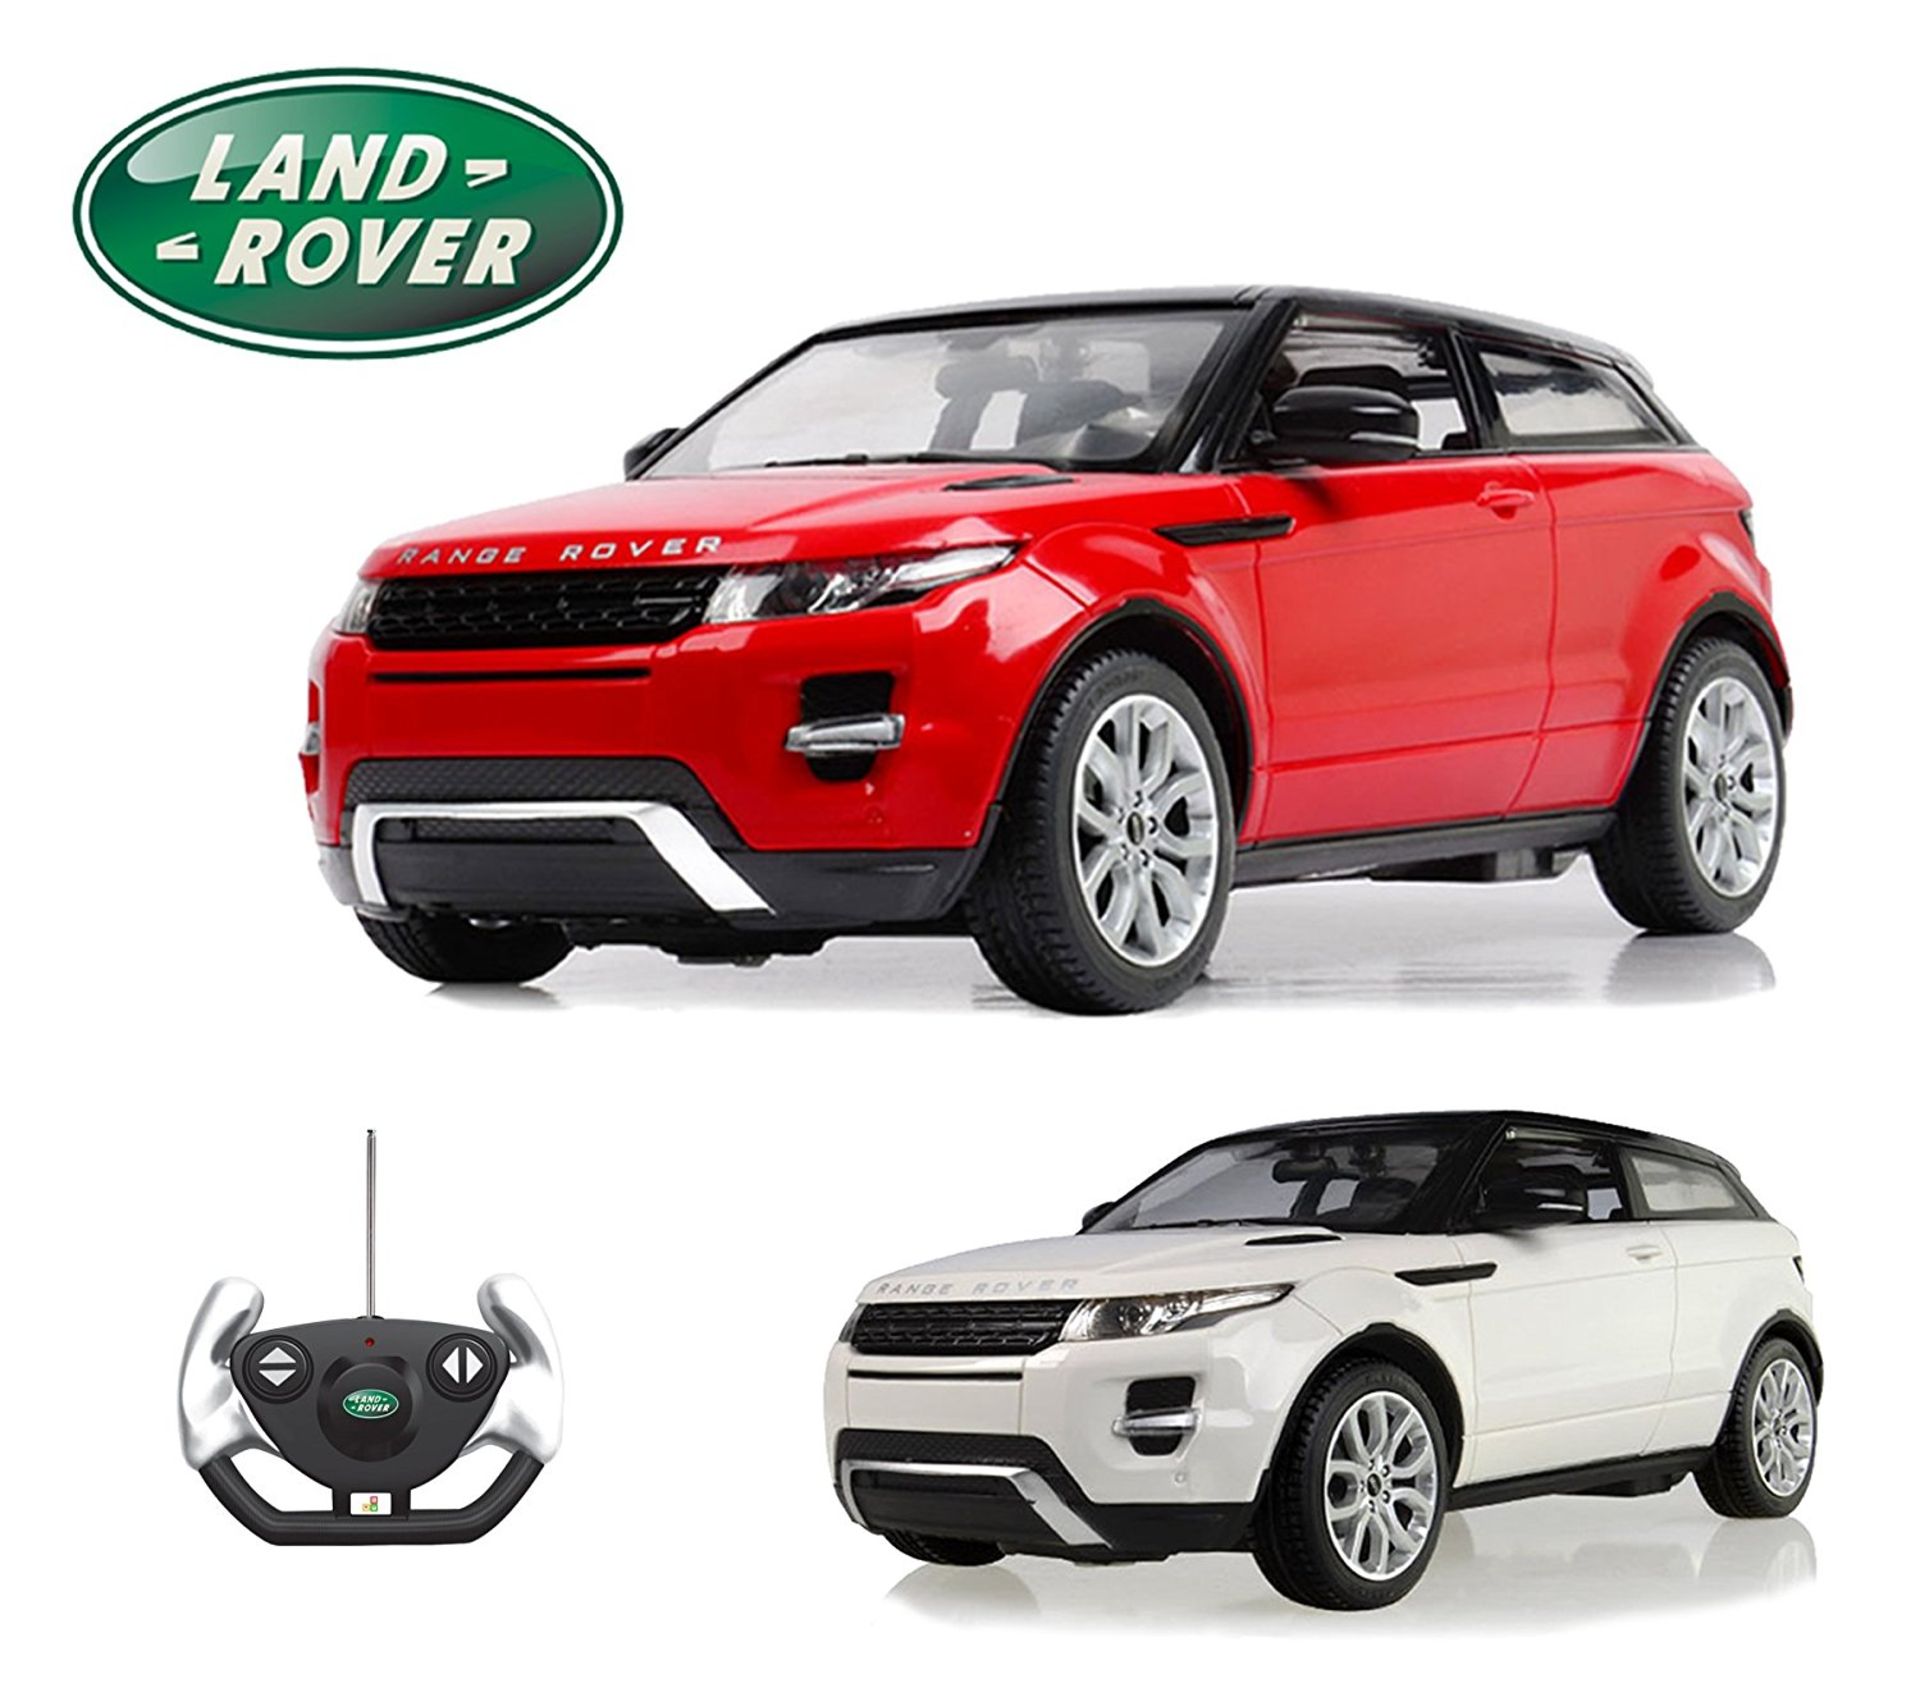 V Brand New R/C 1:14 Scale Range Rover Evoque - Amazon Price £37.00 - Colours May Vary X 2 YOUR